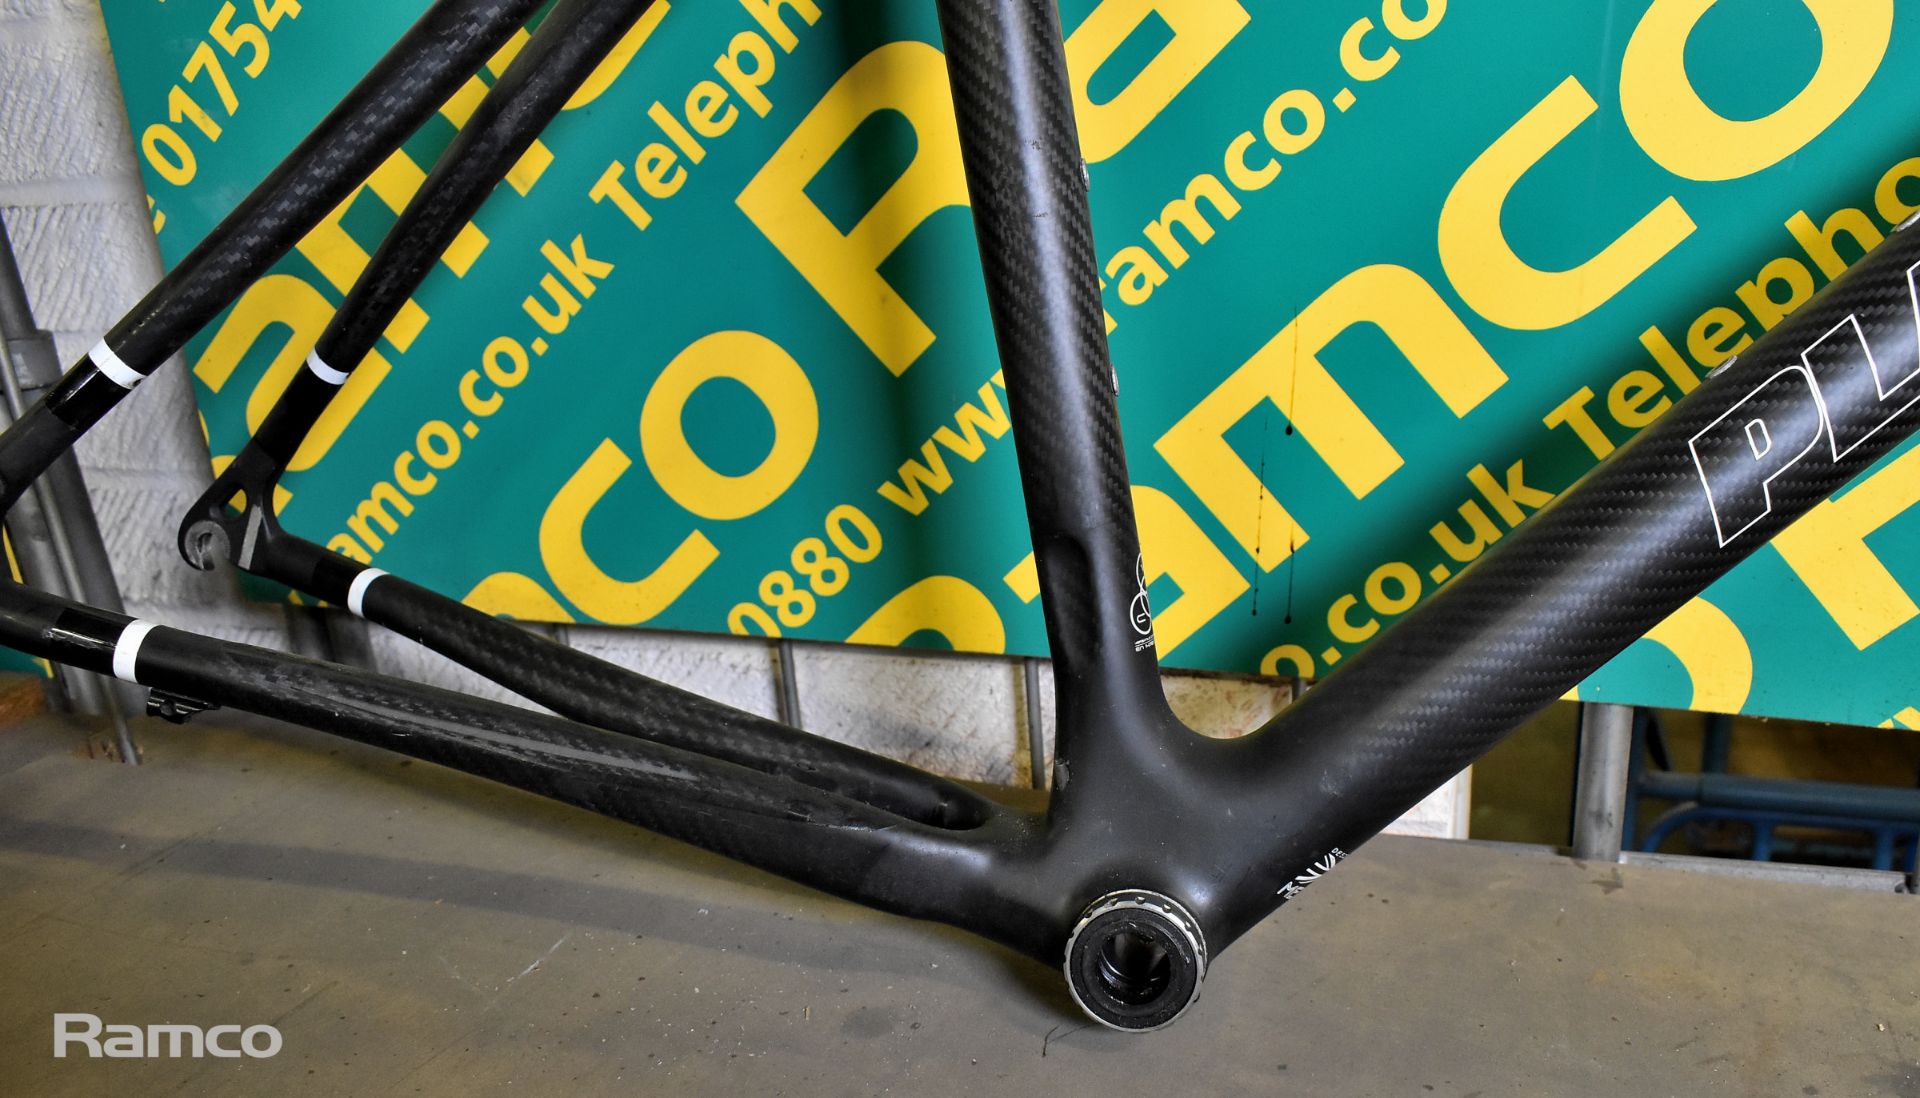 Planet X Pro Carbon road bike frame with handlebars, forks and seat post - damaged forks and frame - Image 2 of 7